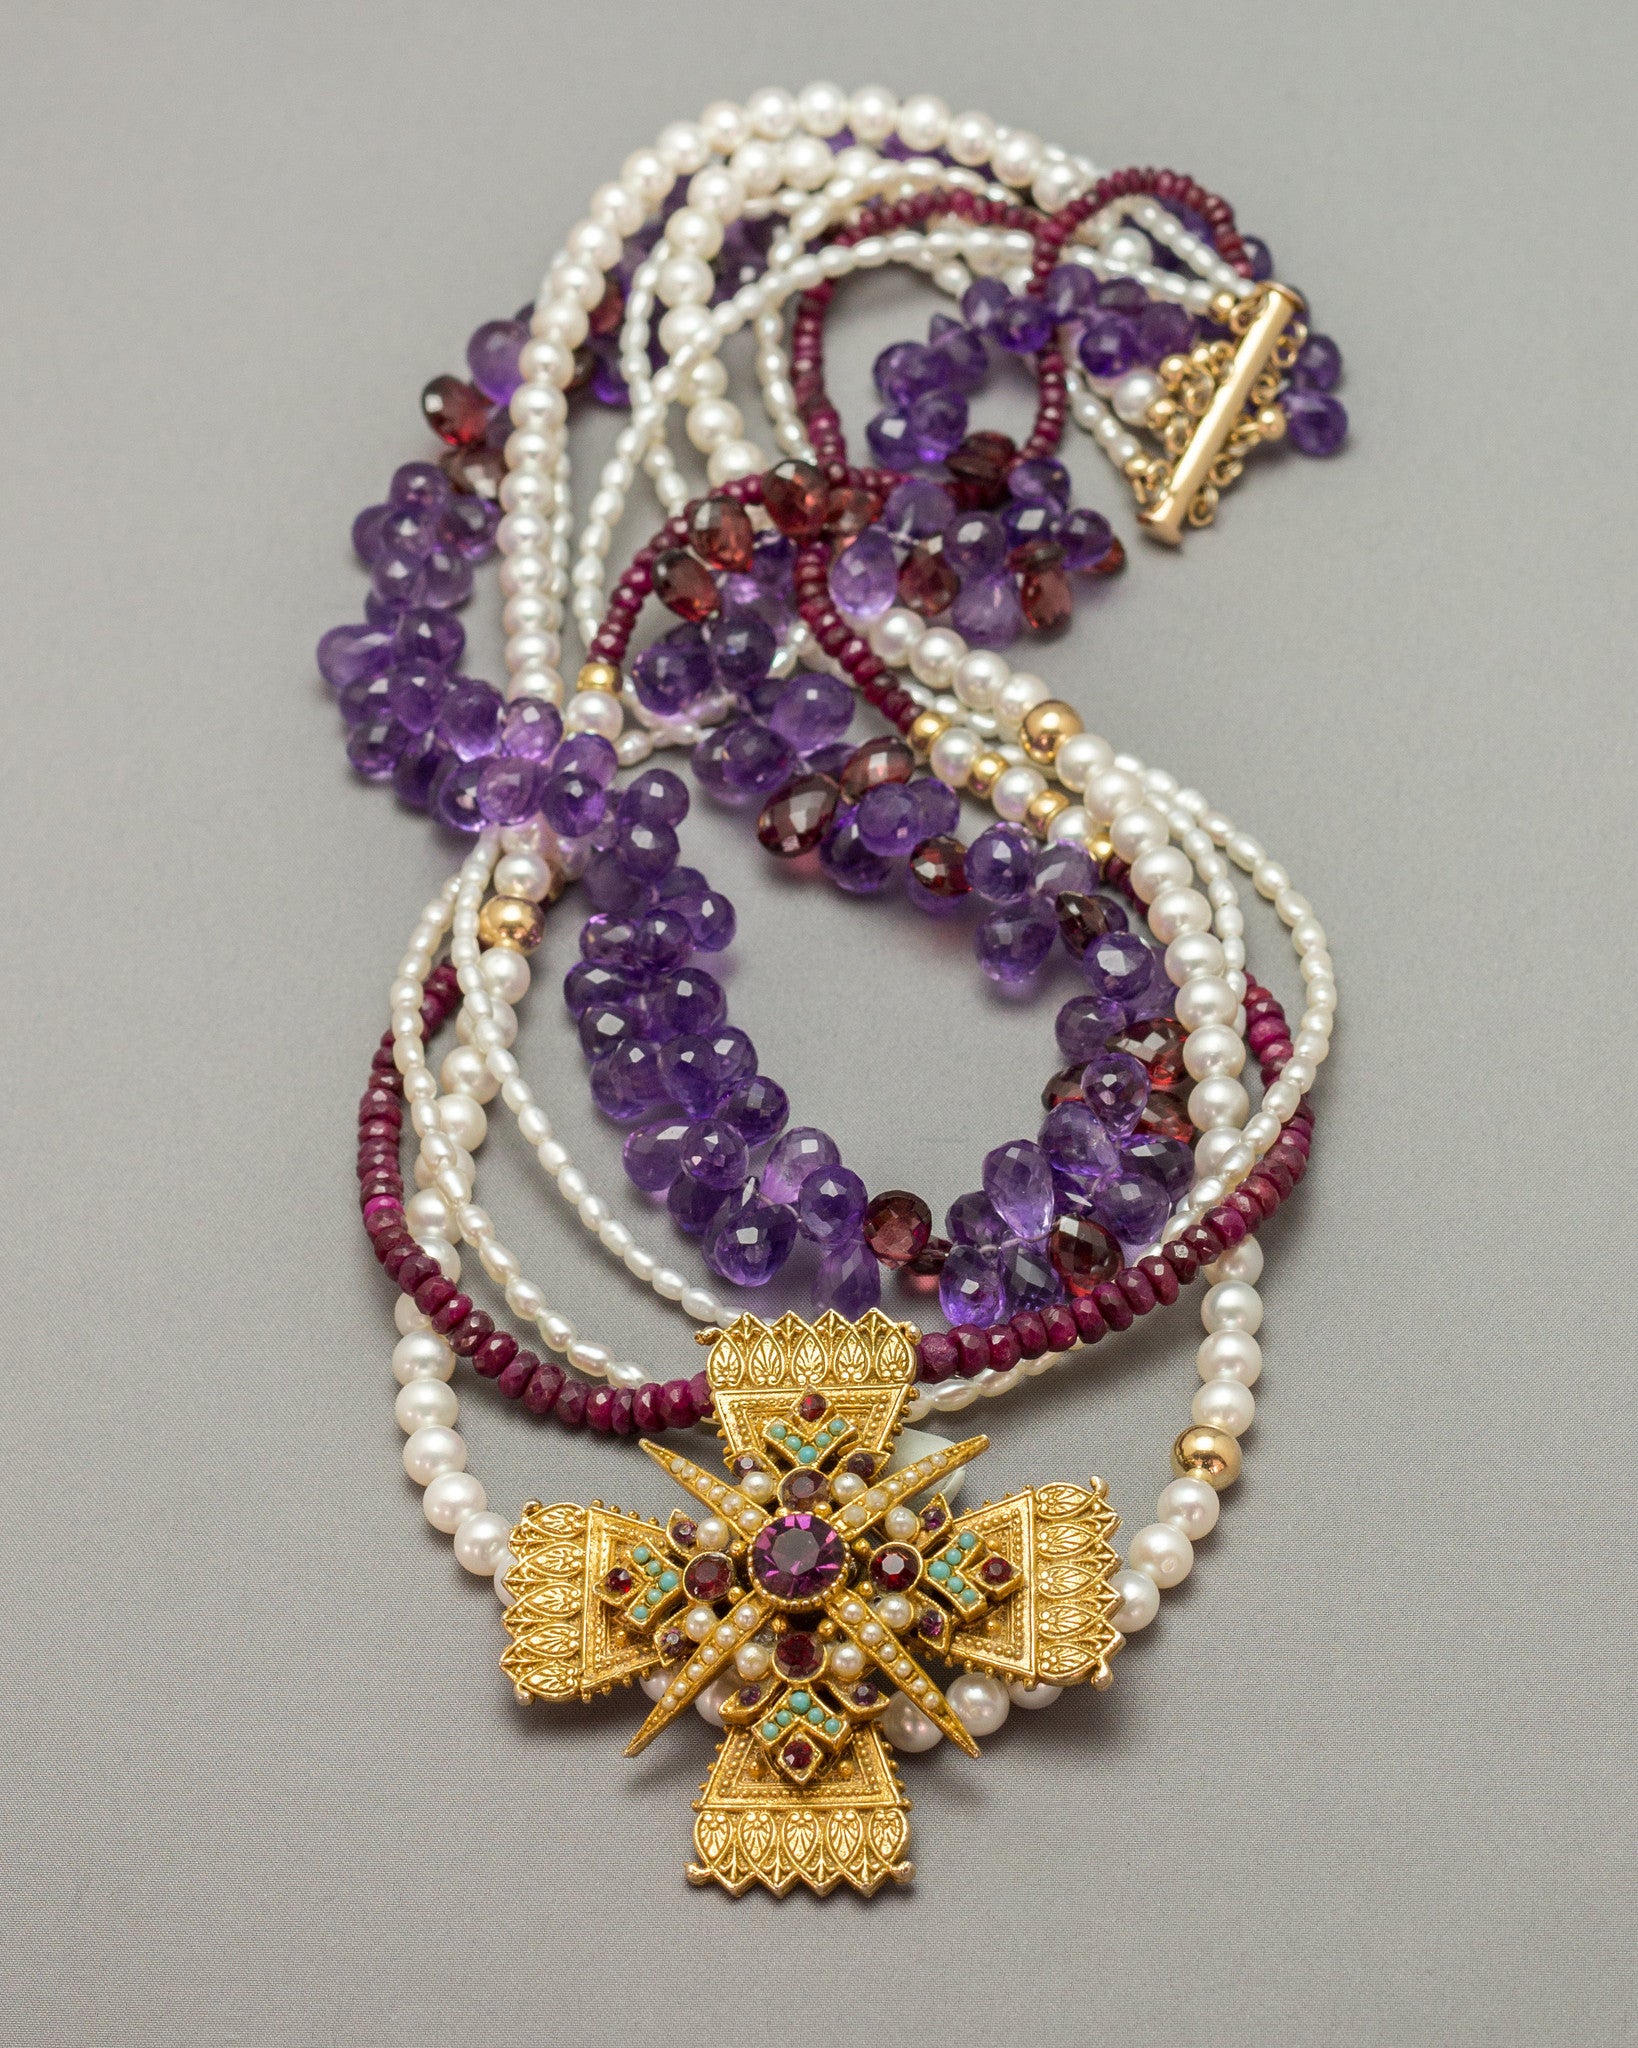 Maltese Cross with Rich Jewel-tones and Pearls